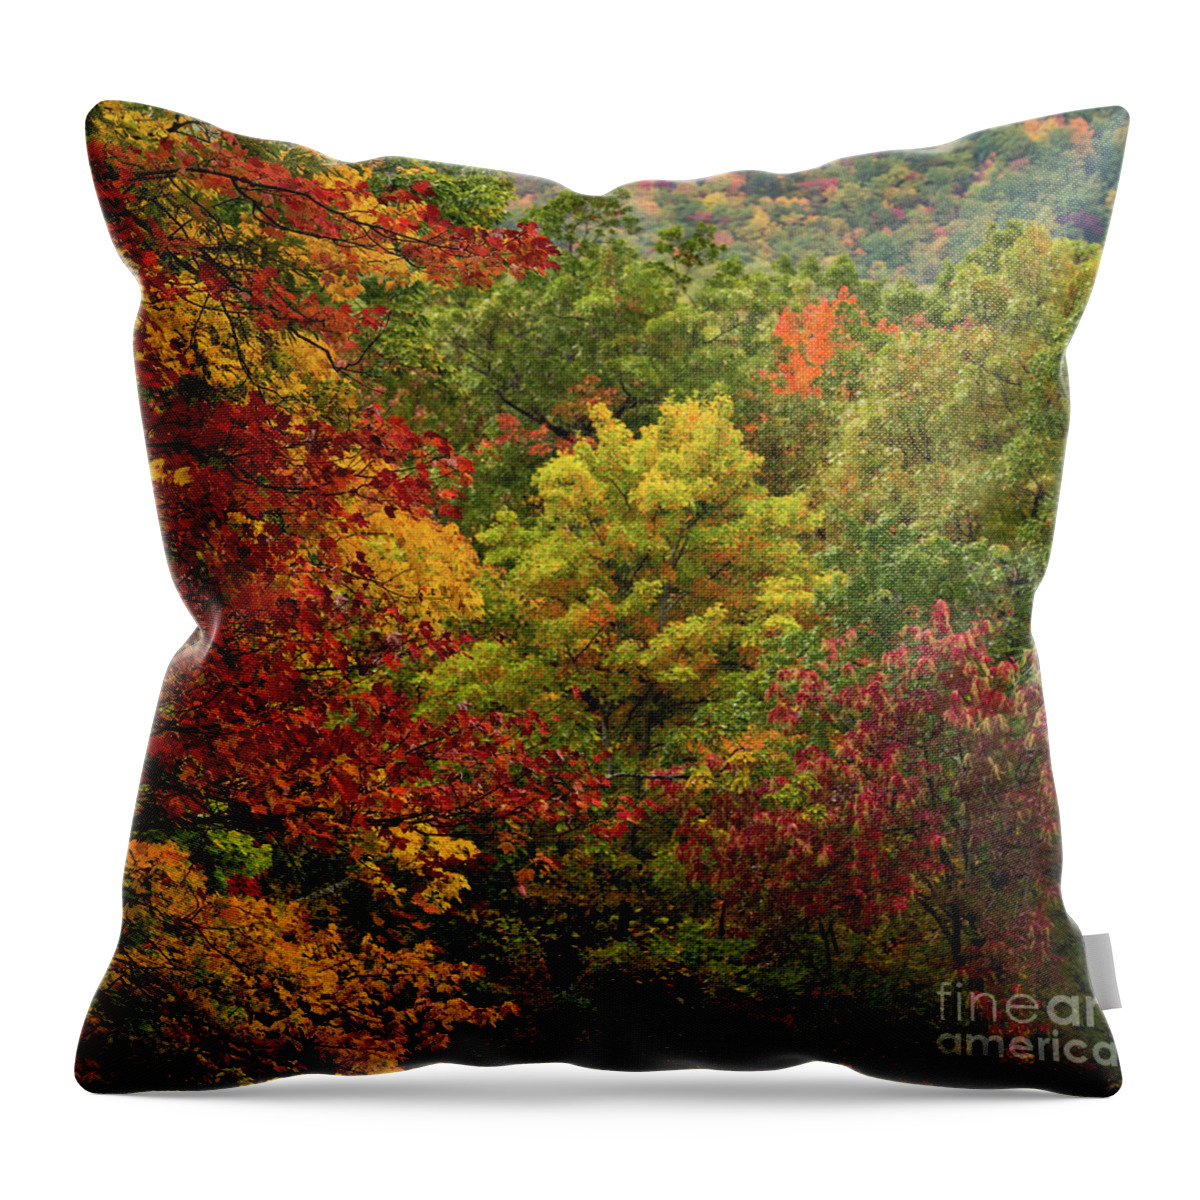 Roaring Fork Throw Pillow featuring the photograph Autumn Colors by Doug Sturgess